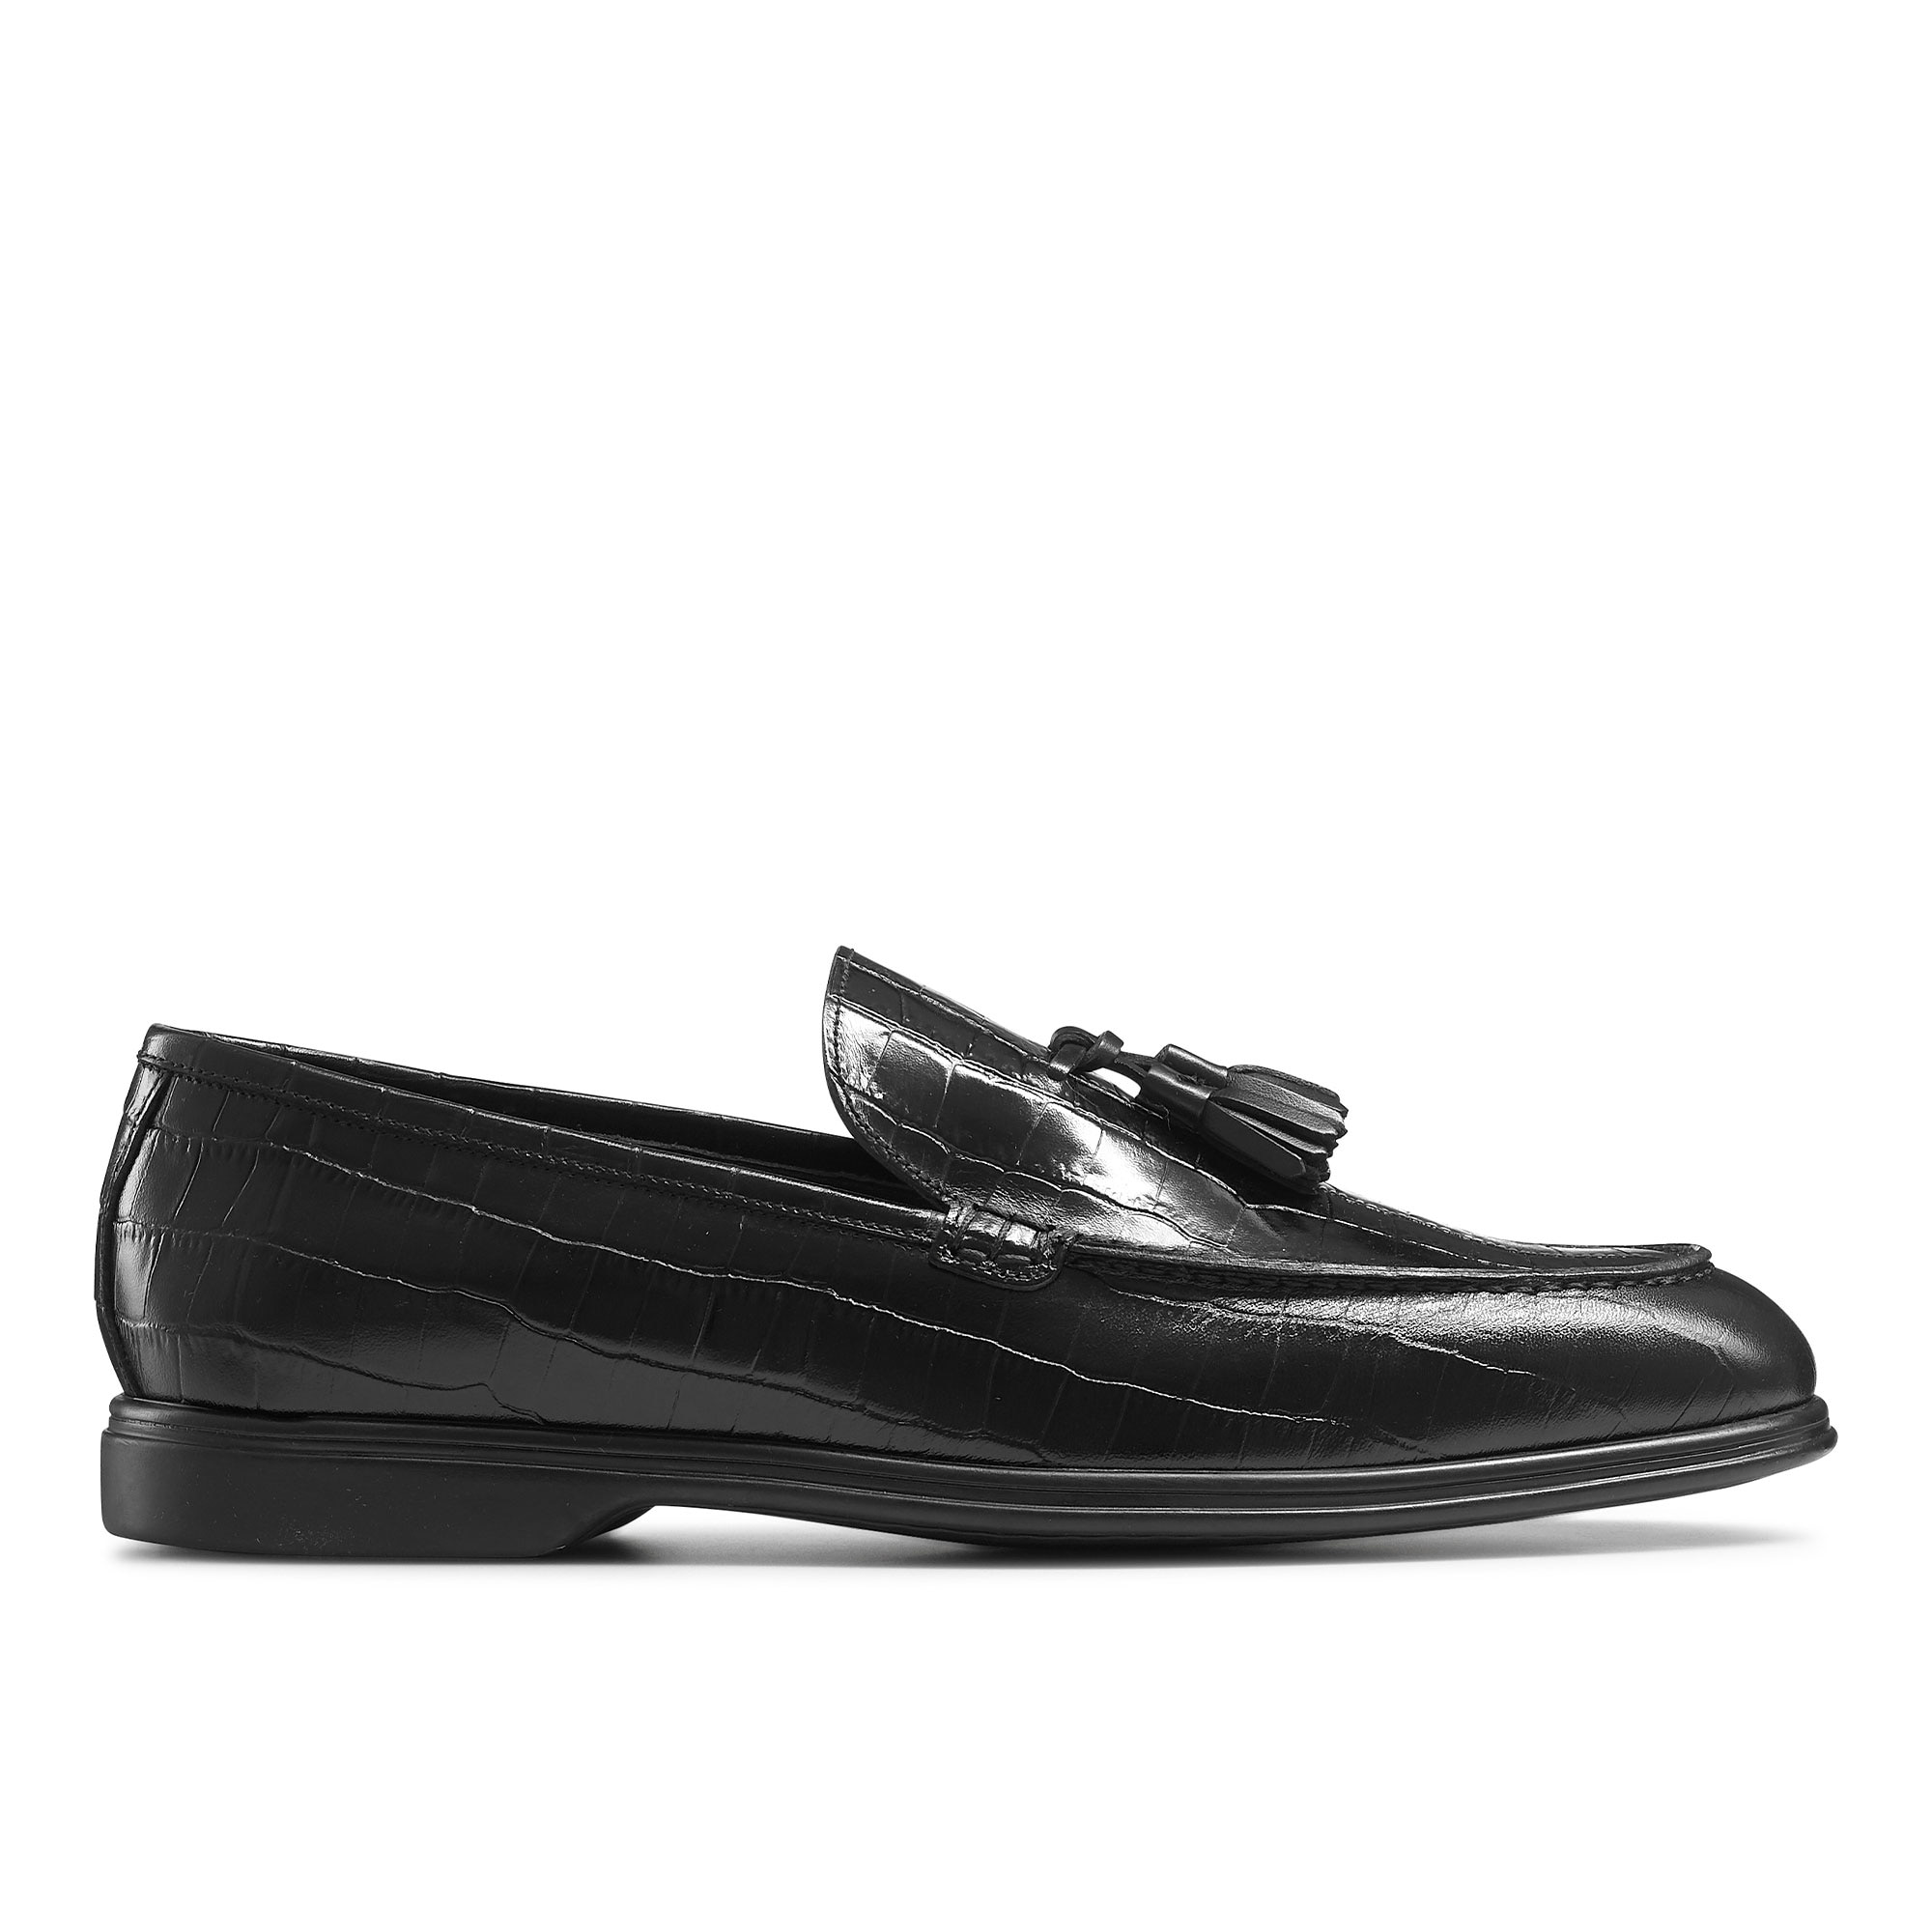 Russell and Bromley Keeble 3 tassel college mens loader